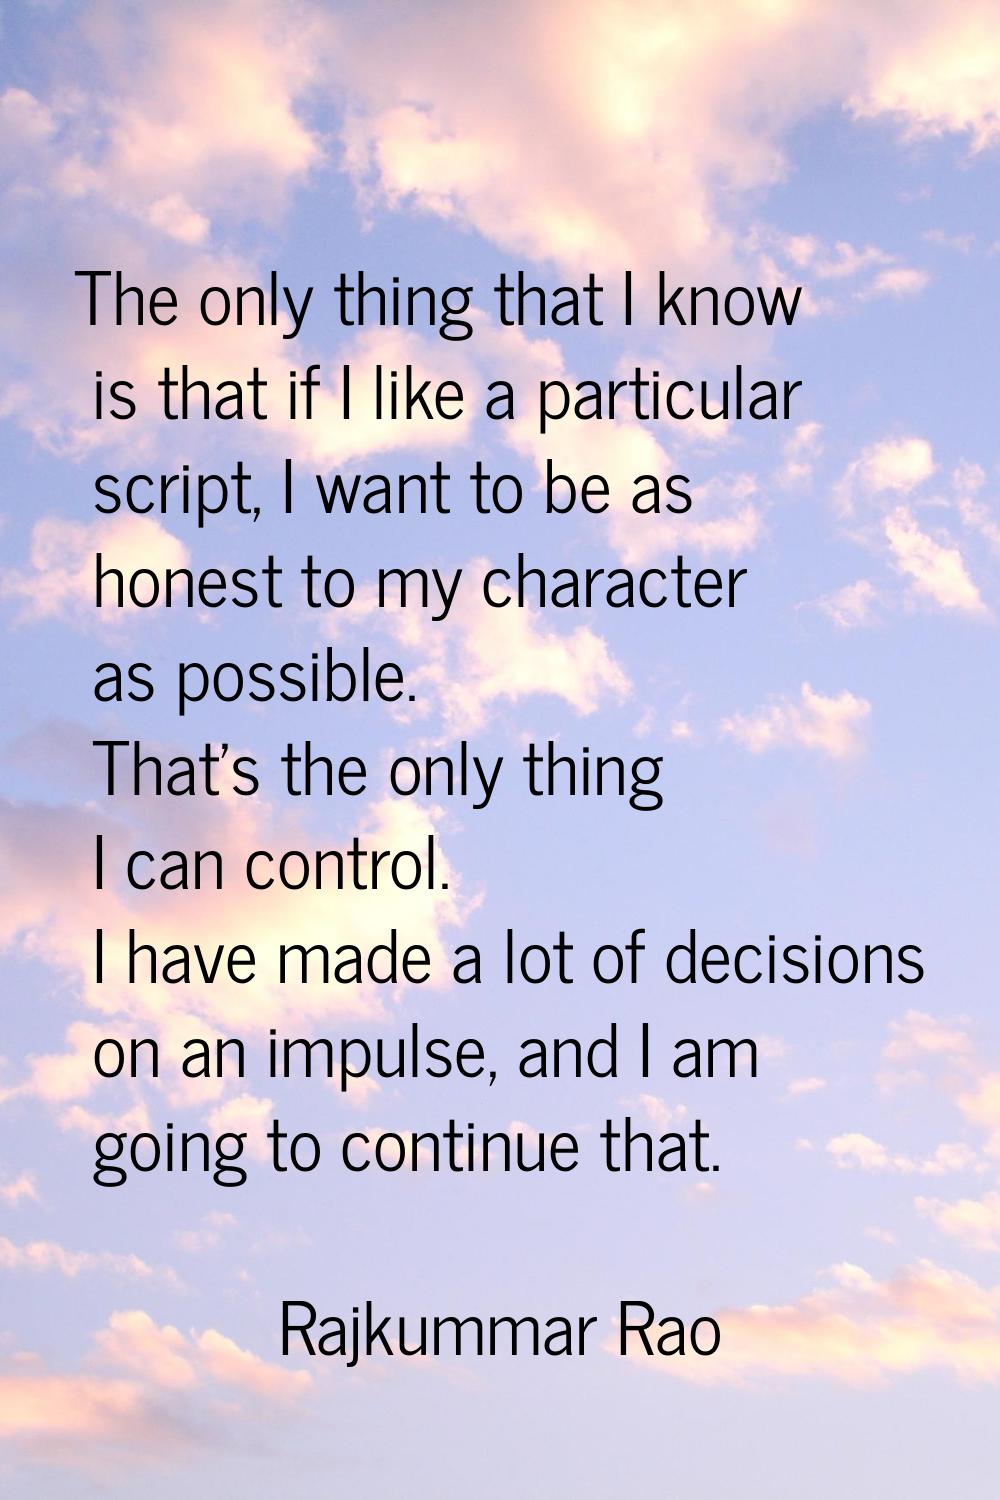 The only thing that I know is that if I like a particular script, I want to be as honest to my char